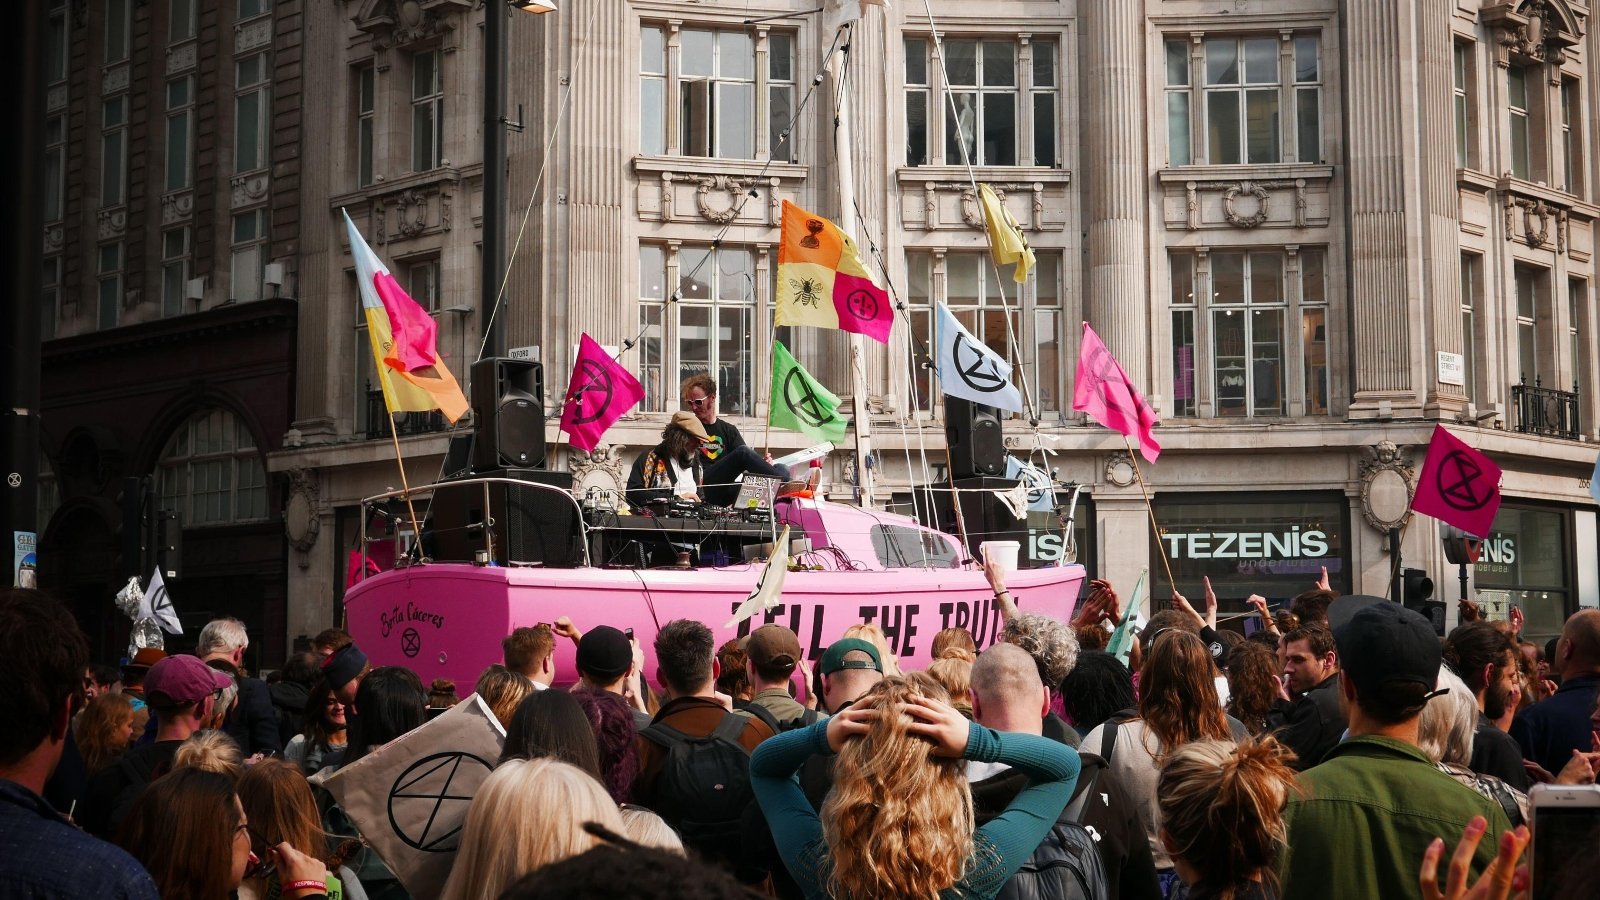 Activists fixed a pink boat named after murdered Honduran environmental activist Berta Cáceres in the middle of the busy intersection of Oxford Street and Regent Street